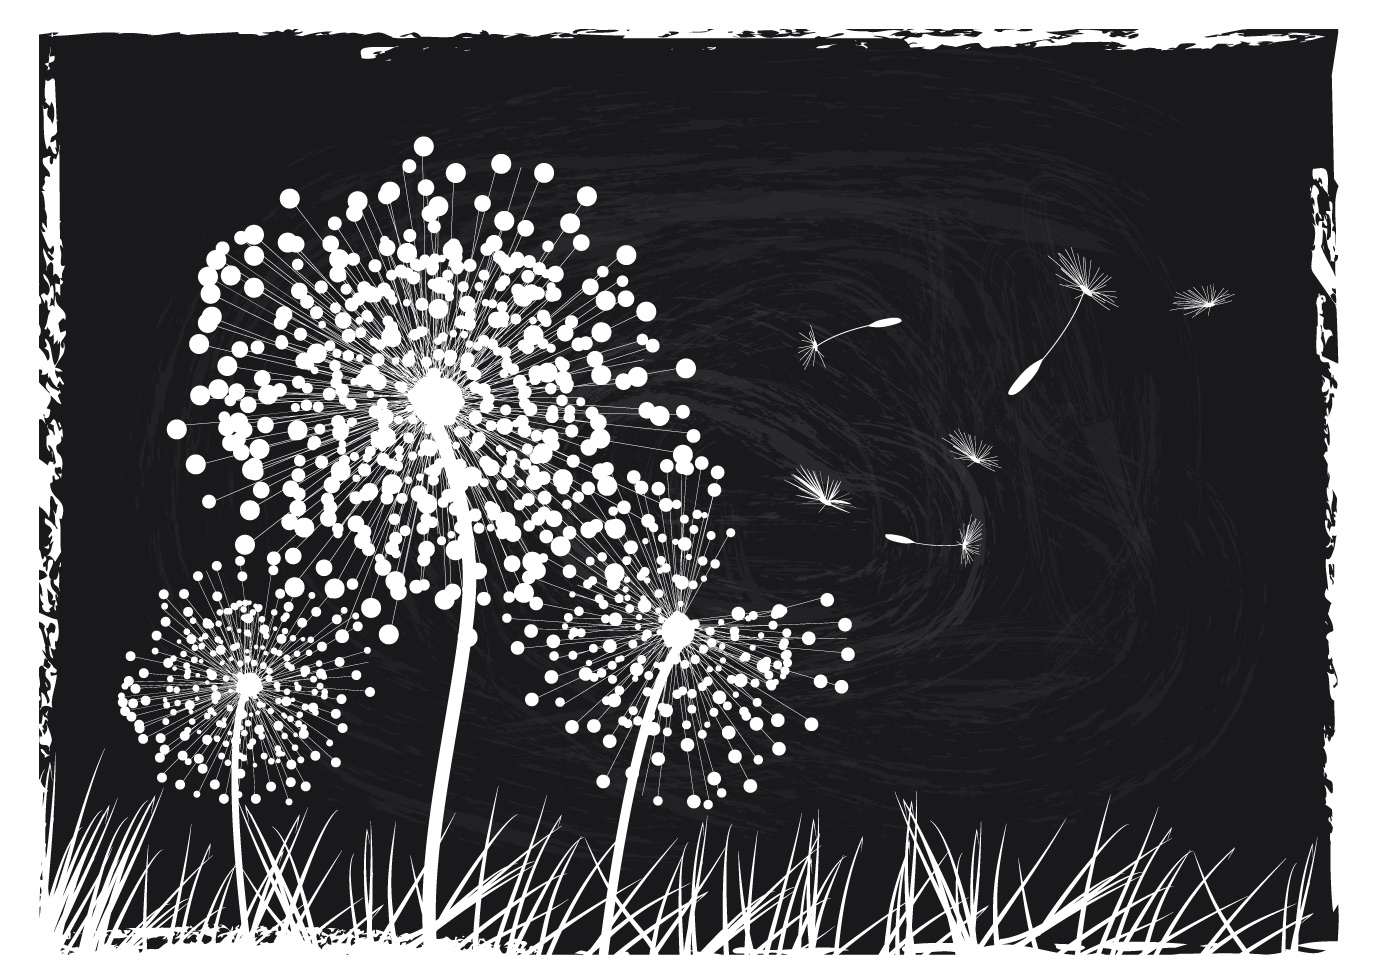  Black  And White  Dandelion Background  Download Free 